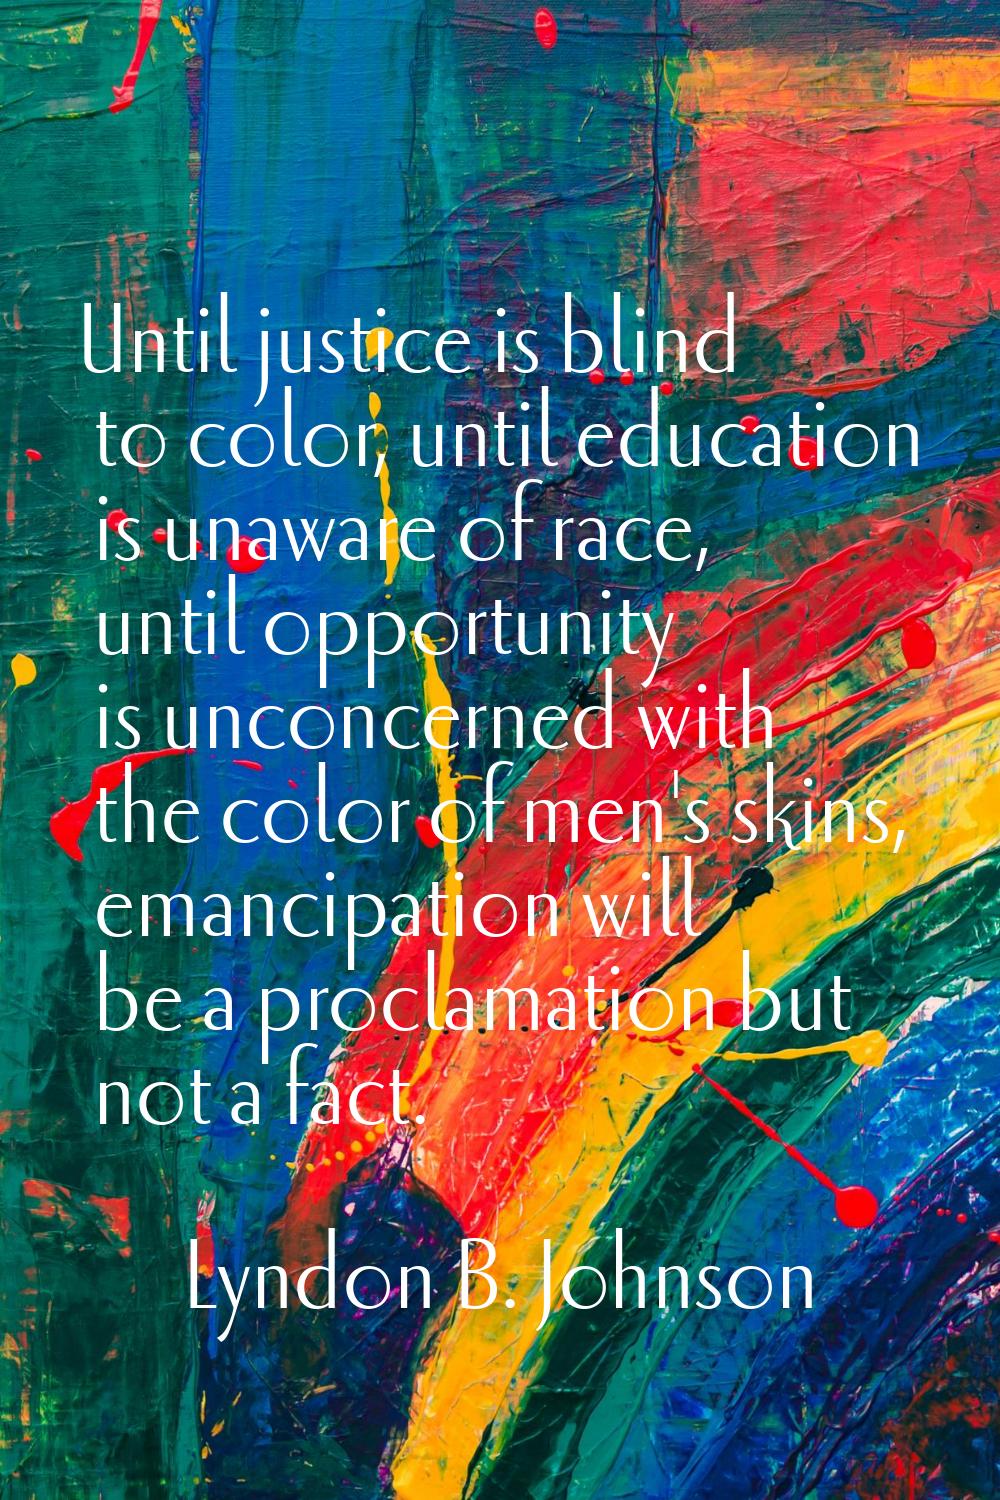 Until justice is blind to color, until education is unaware of race, until opportunity is unconcern